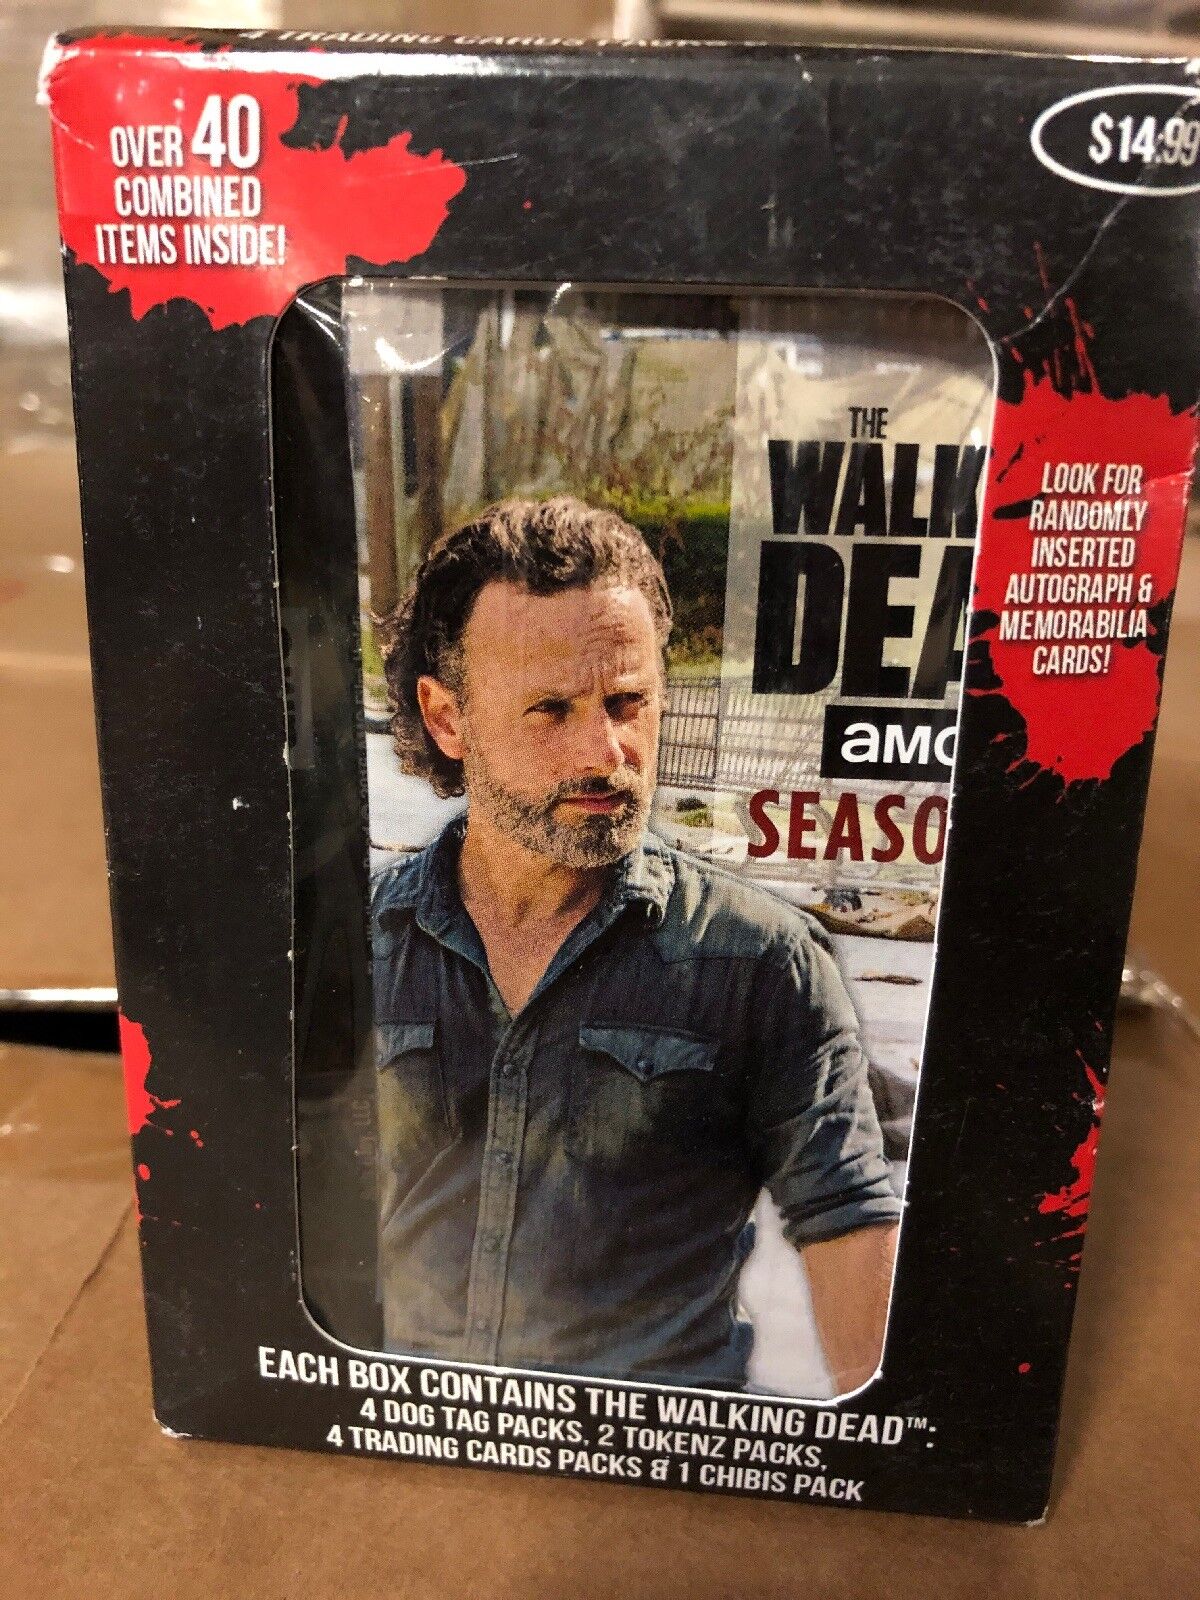 The Walking Dead Collectors Box  Dog Tags, Trading Cards And Figurines Inside.